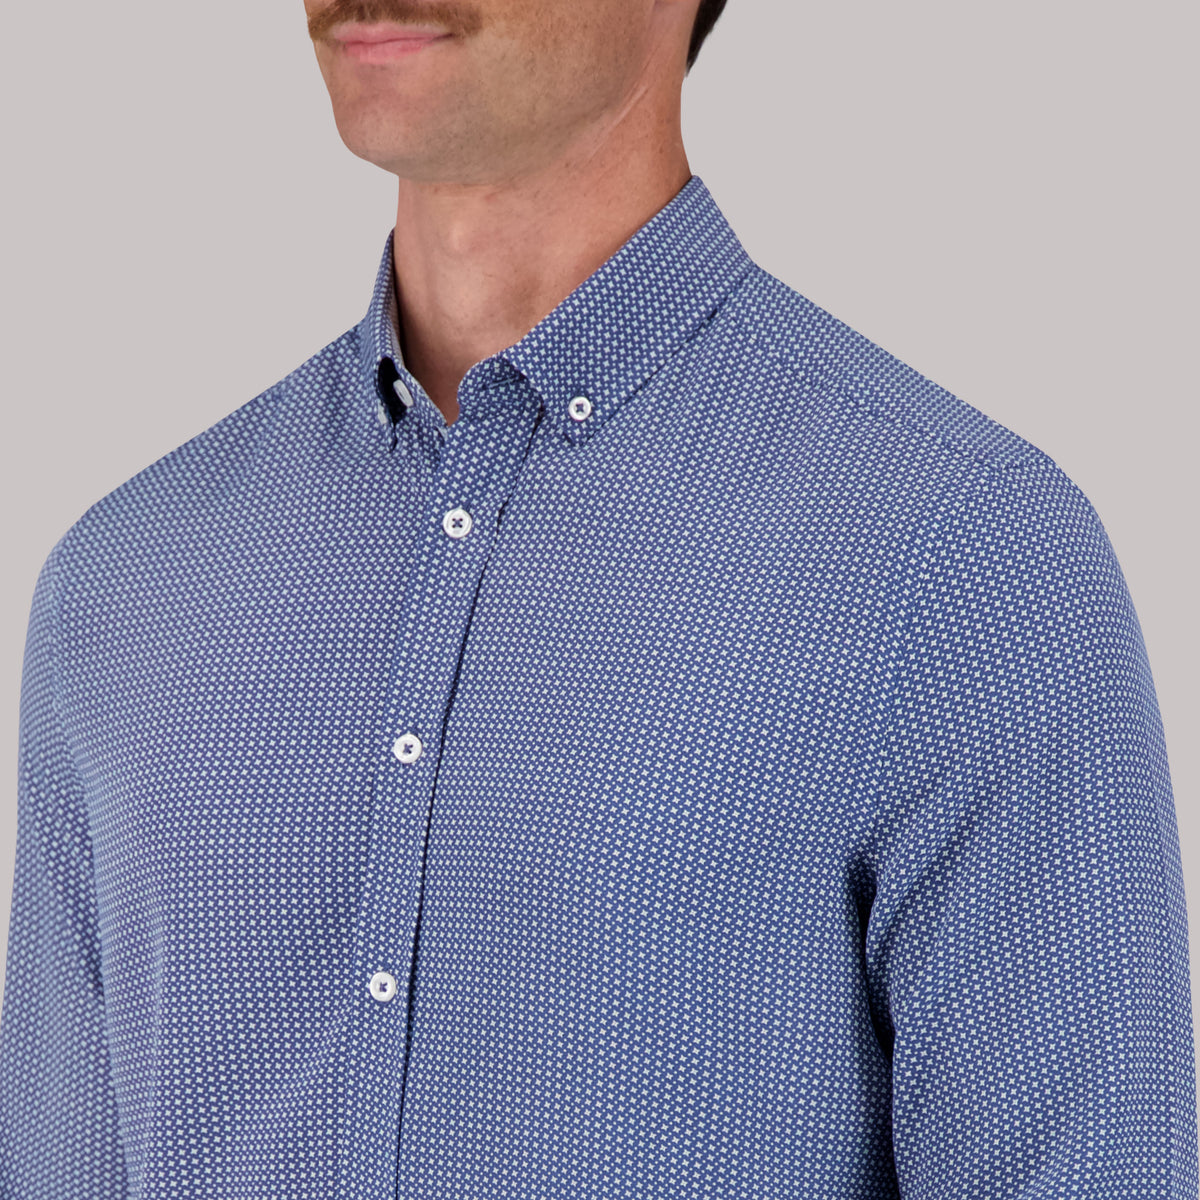 Model Front Close Up View of Long Sleeve 4-Way Sport Shirt with Geometric Print in Cobalt